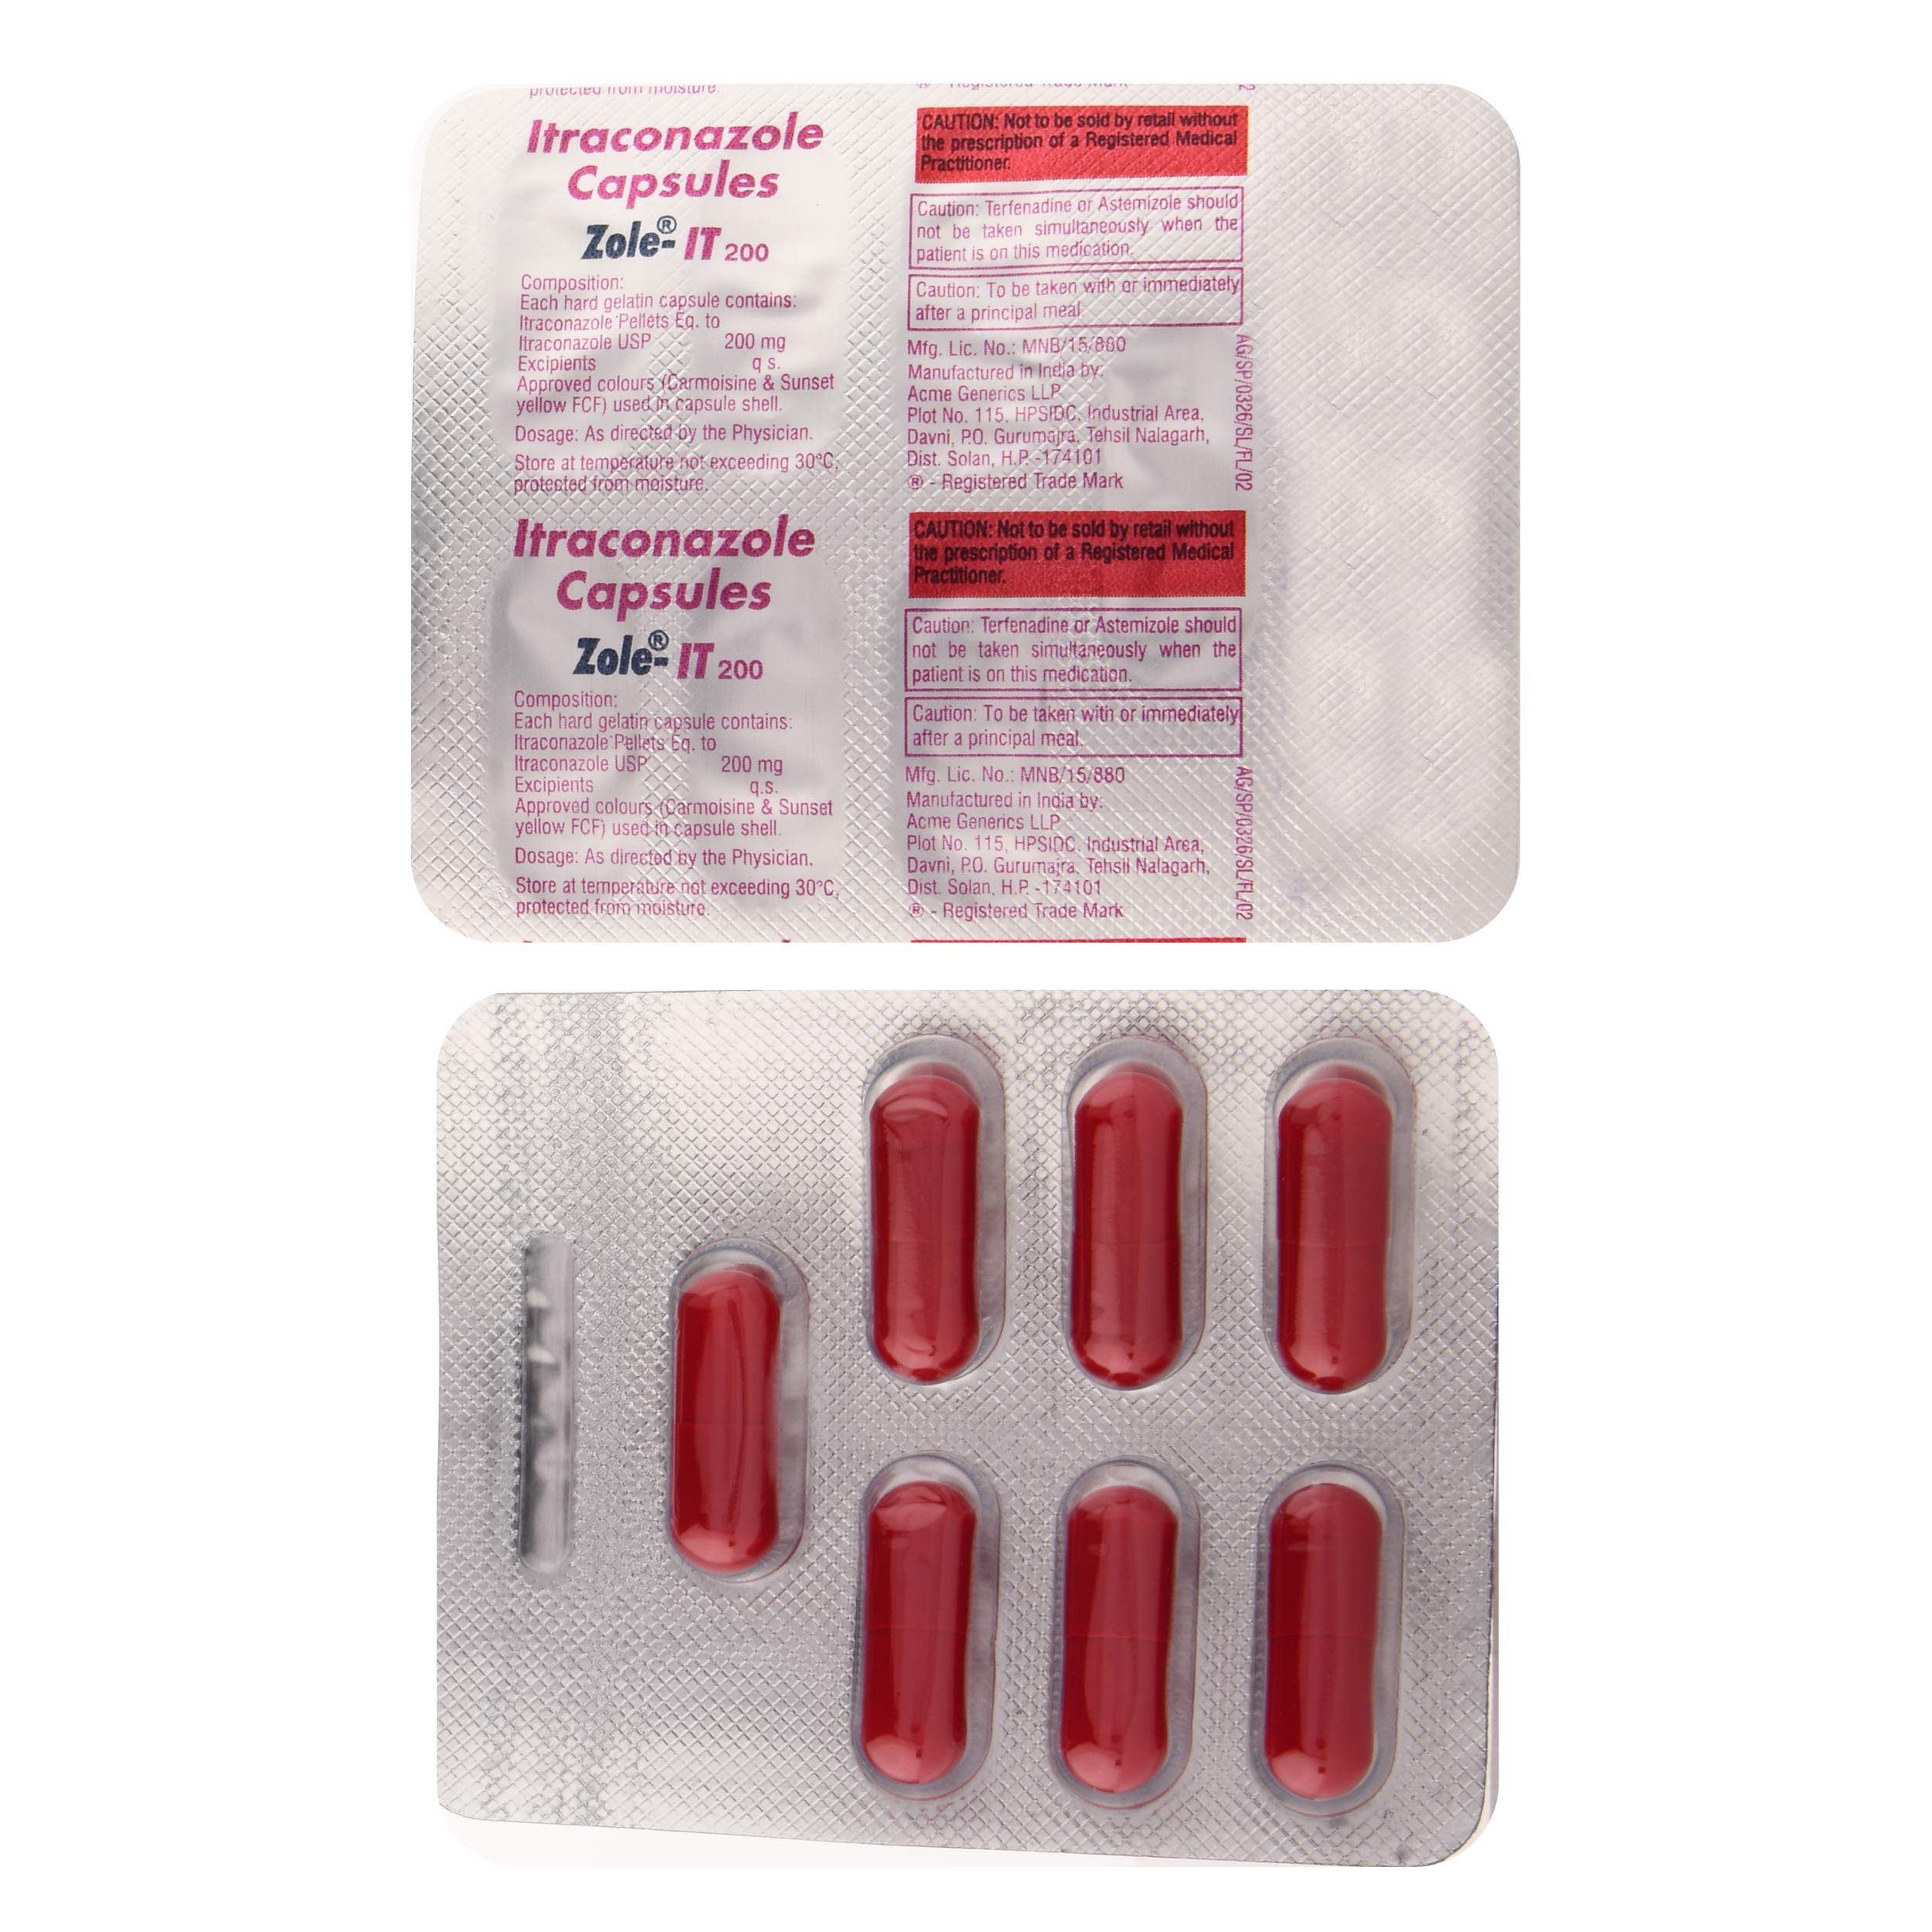 itraconazole capsules 200 mg lowest price